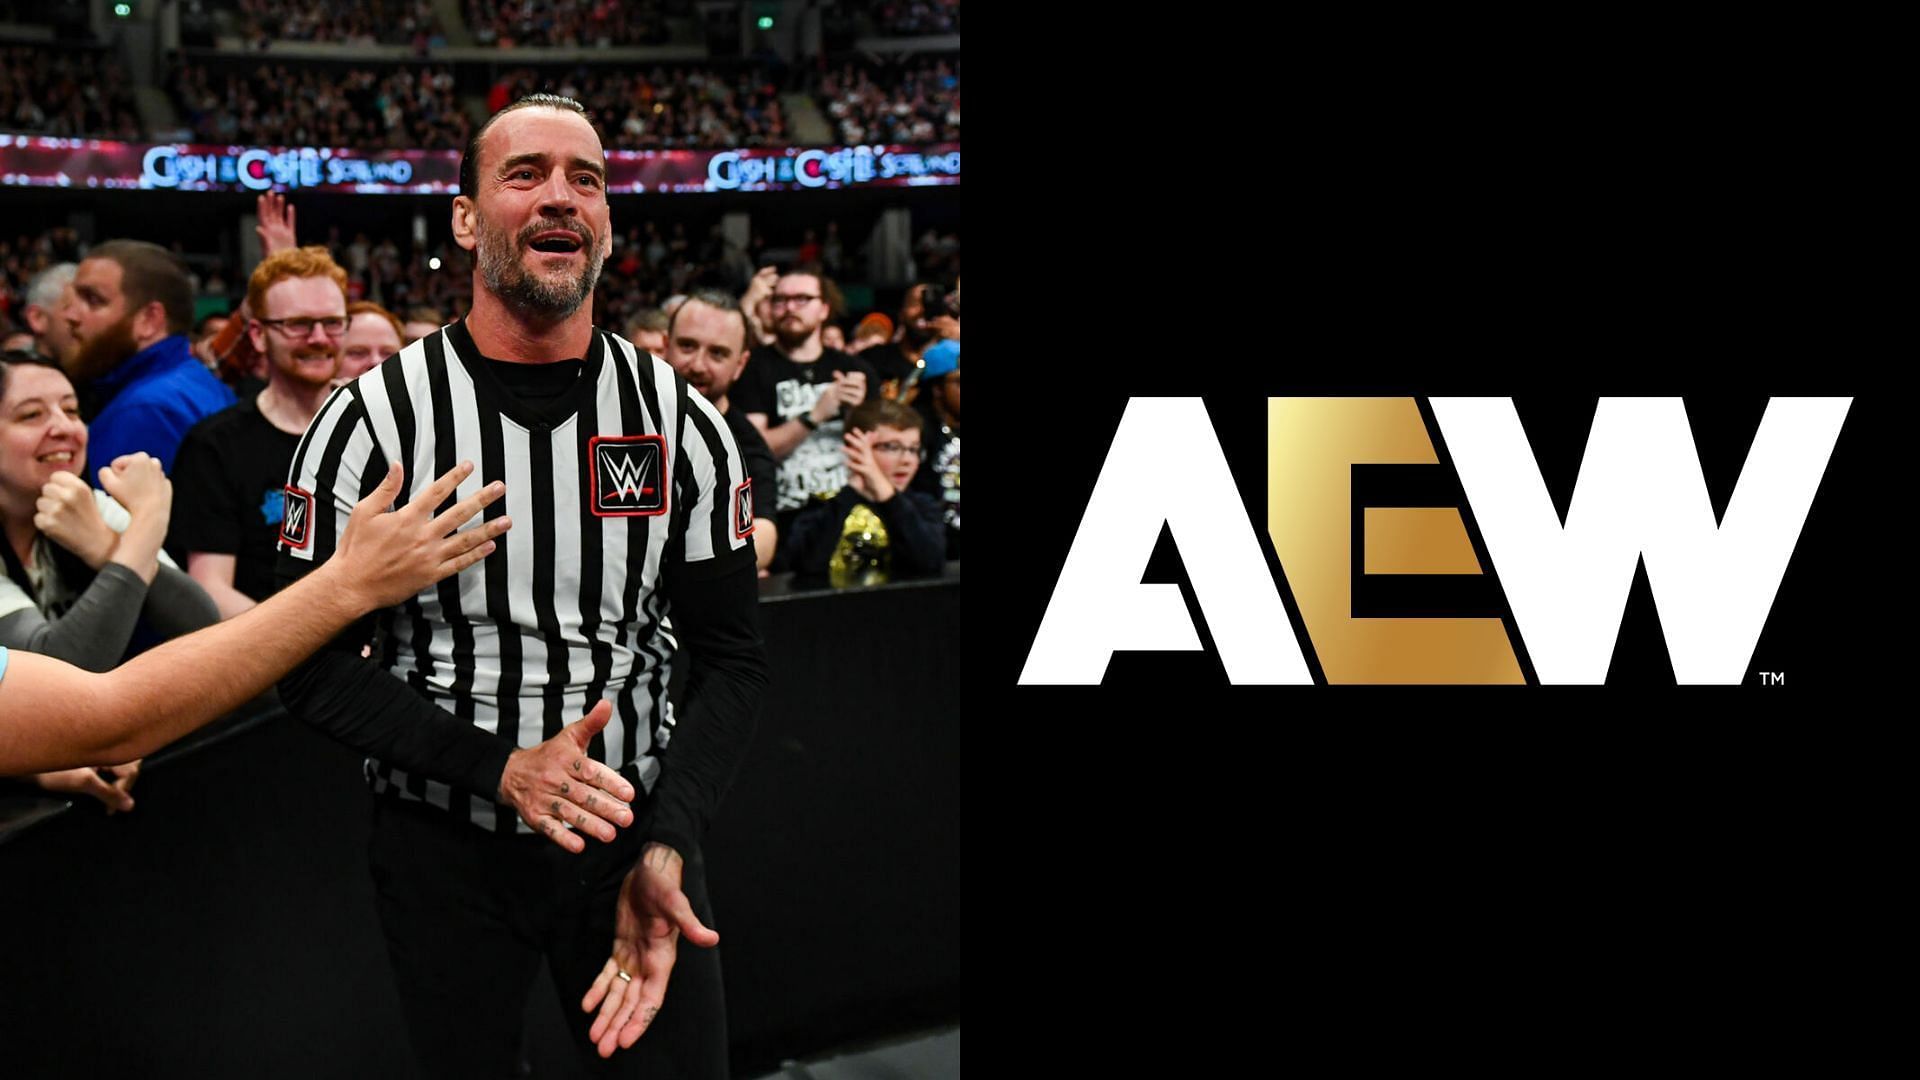 CM Punk is a former AEW World Champion who is now with WWE [Photo courtesy of WWE